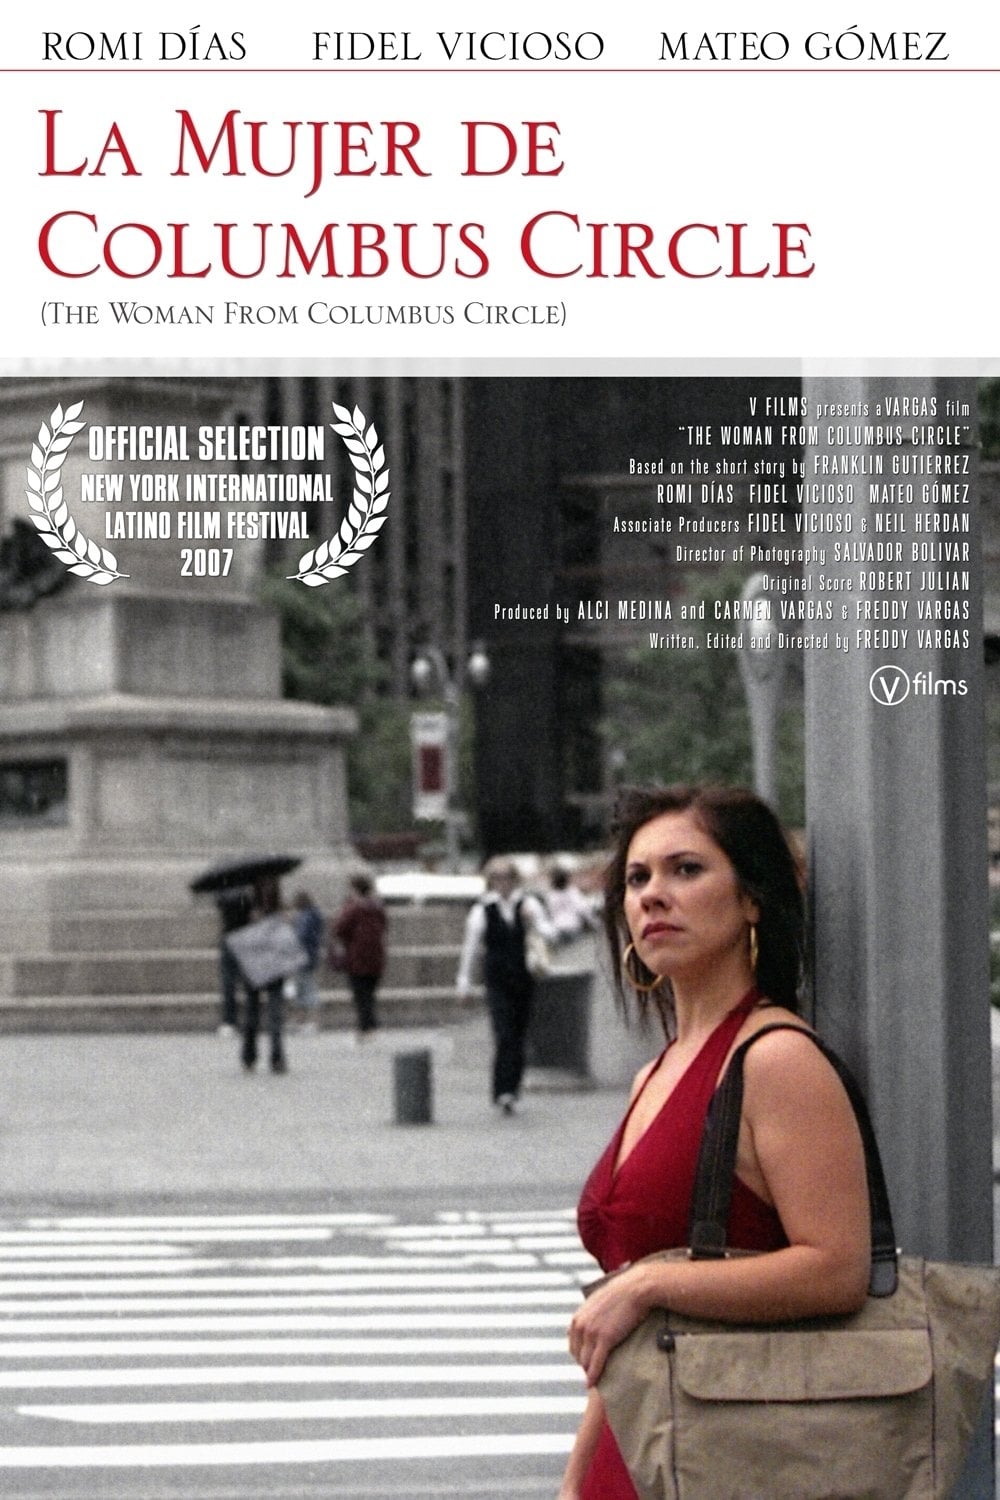 The Woman from Columbus Circle